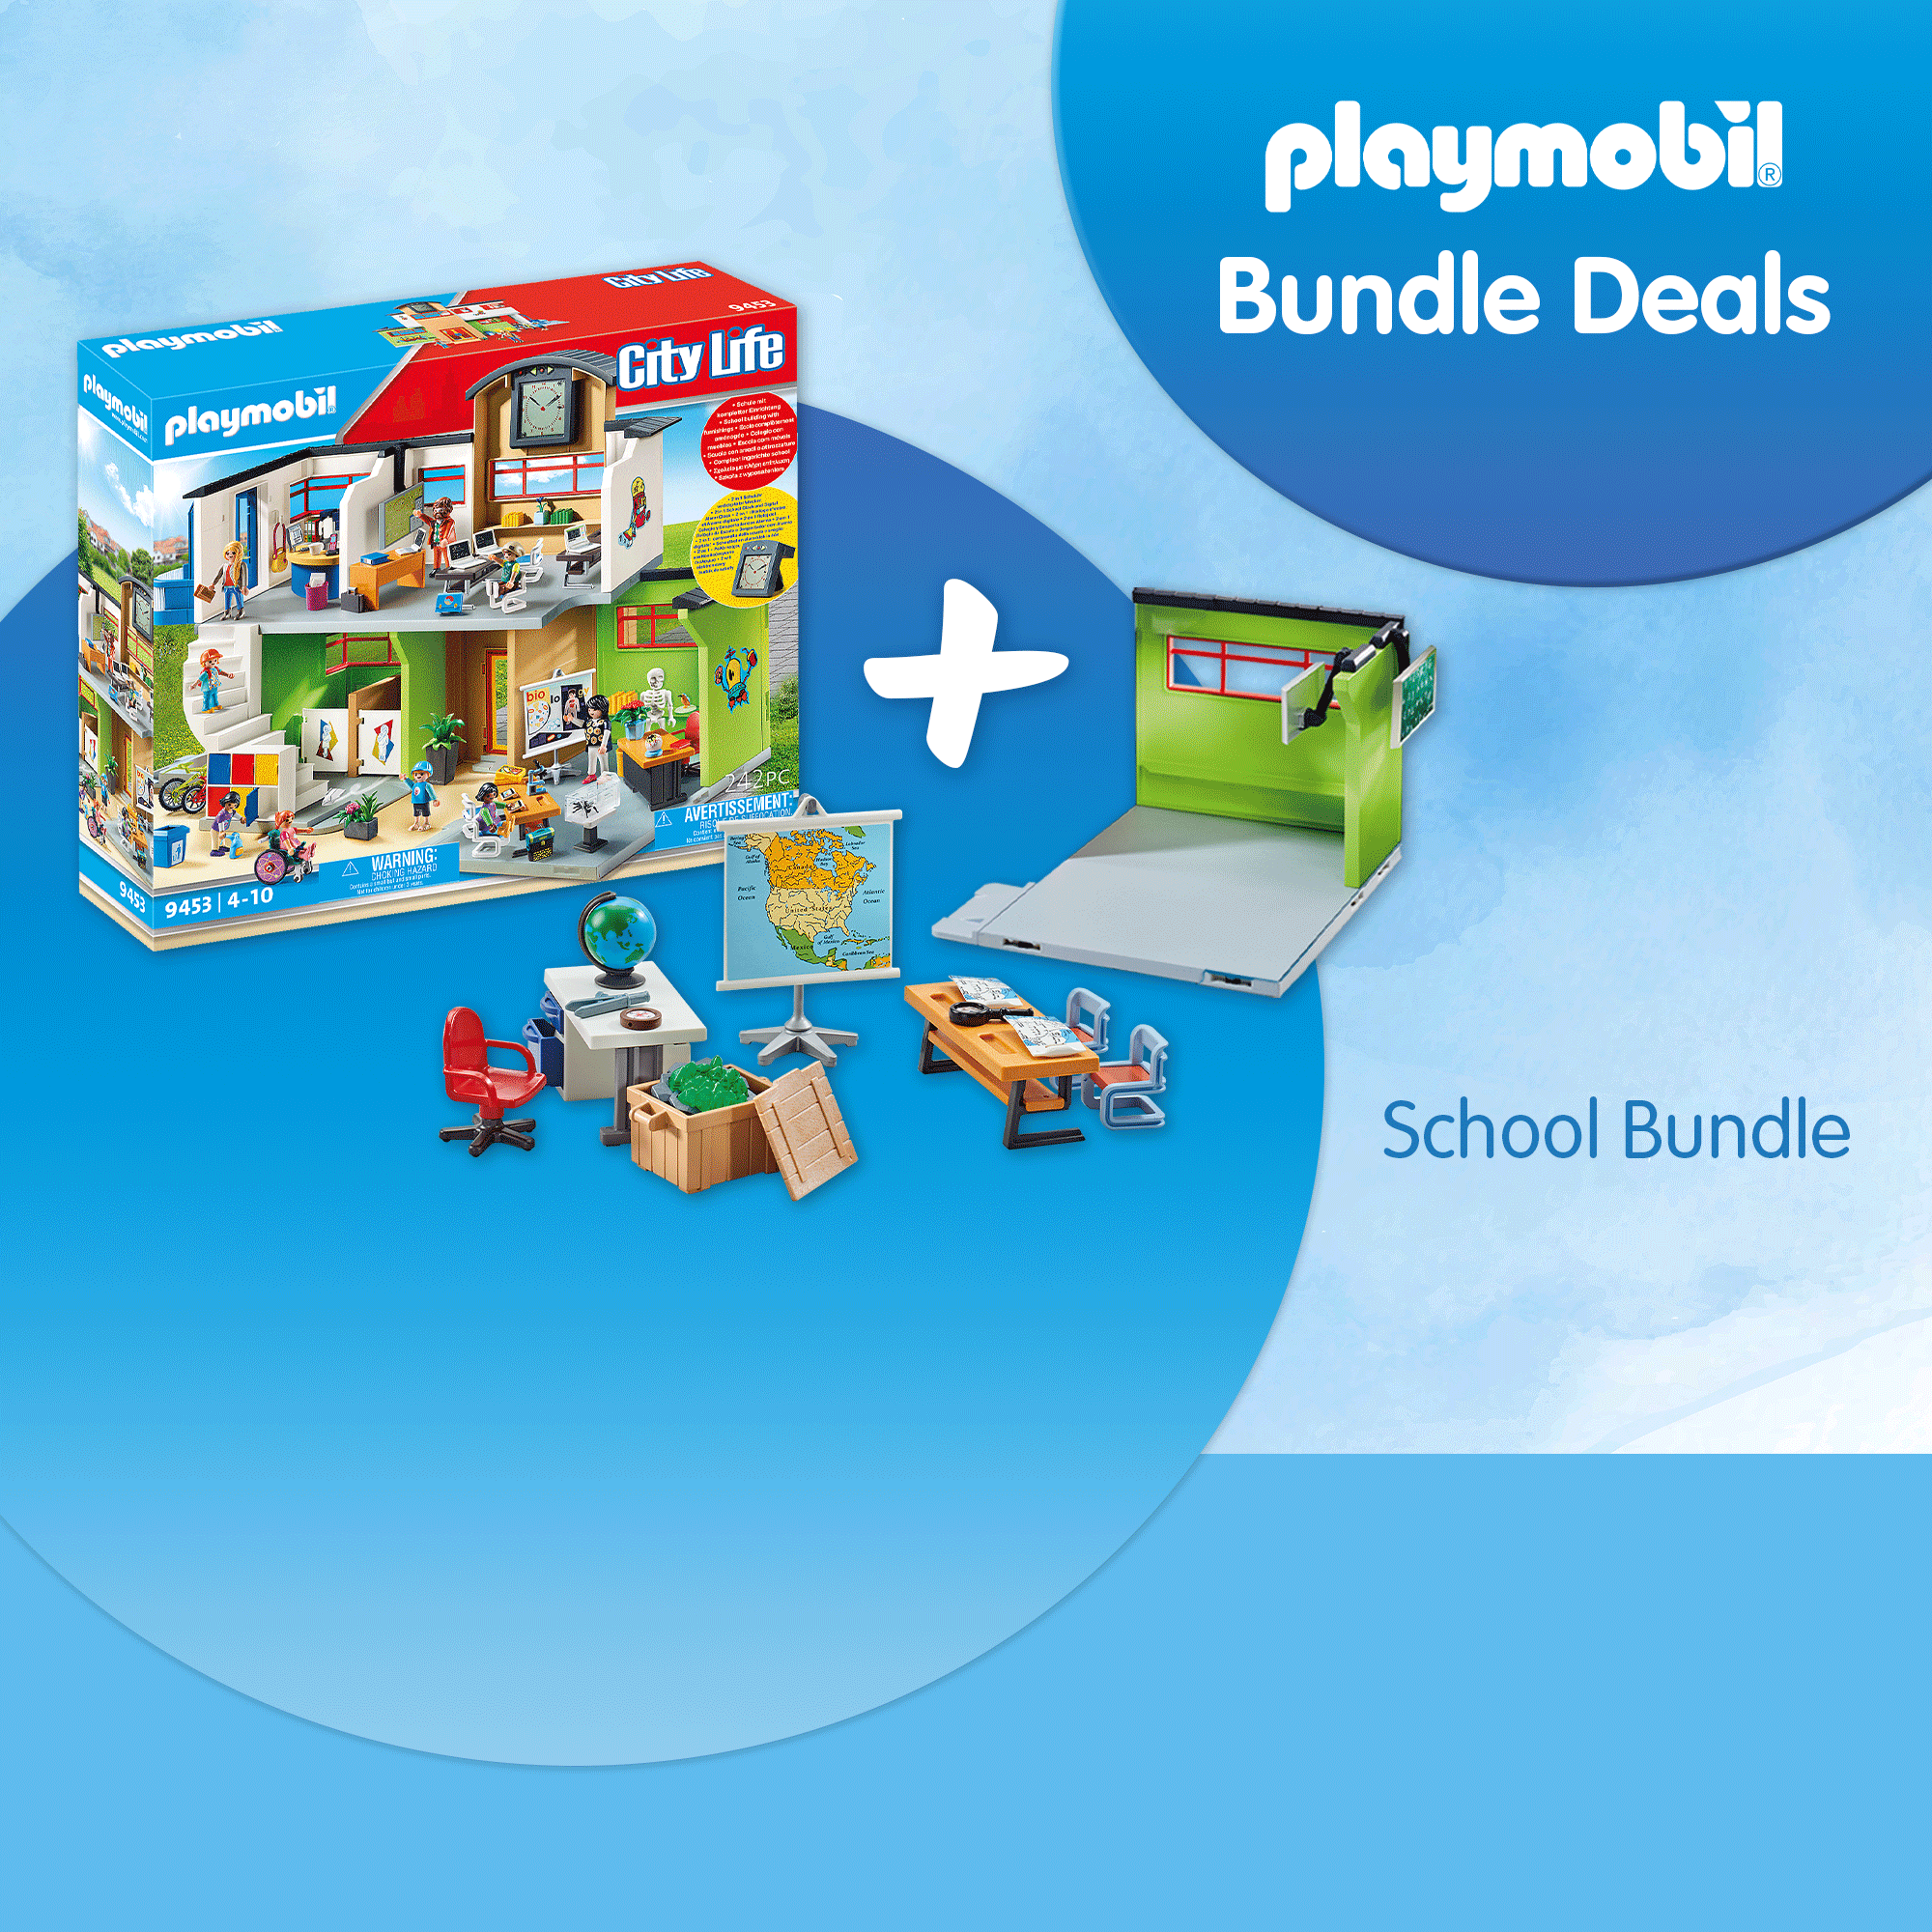 Save with our Bundle deals like PM2101H My Town Bundle